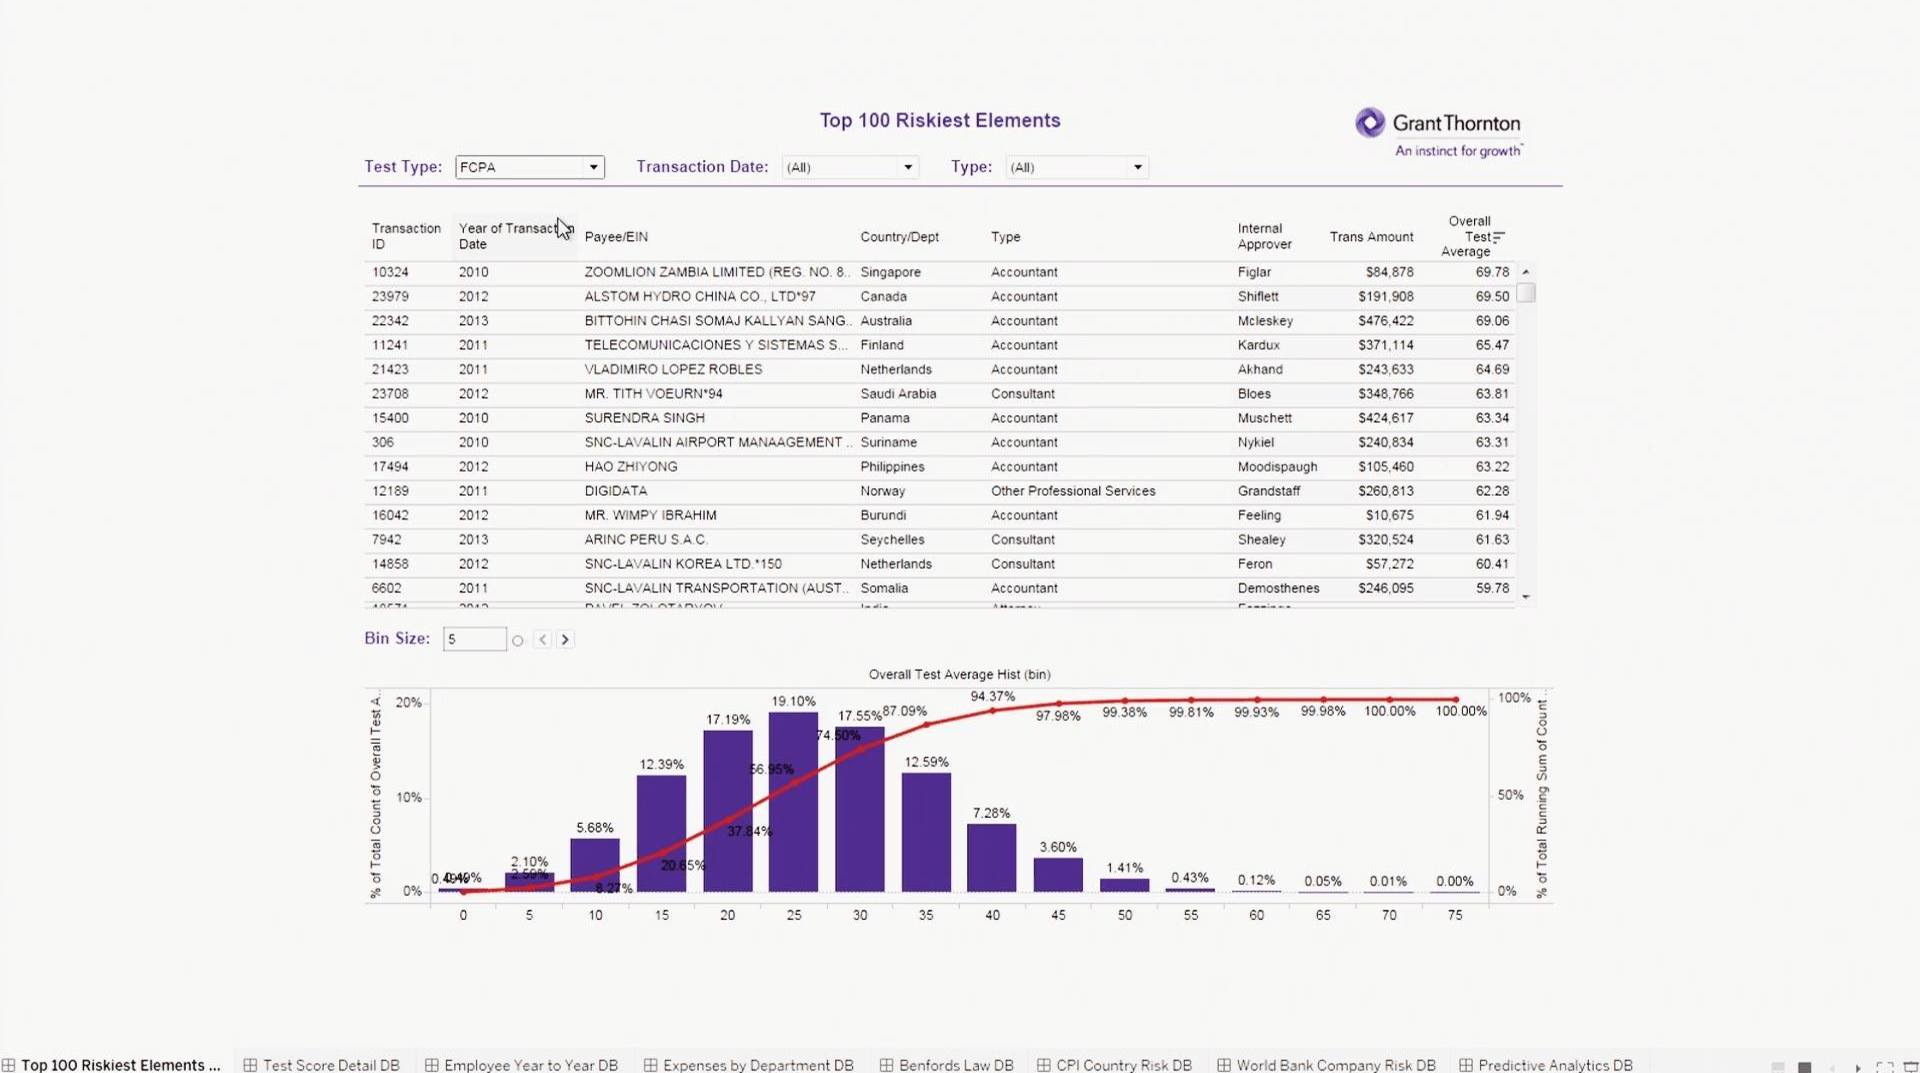 Navigate to Grant Thornton detects risk, fraud, and waste with Tableau